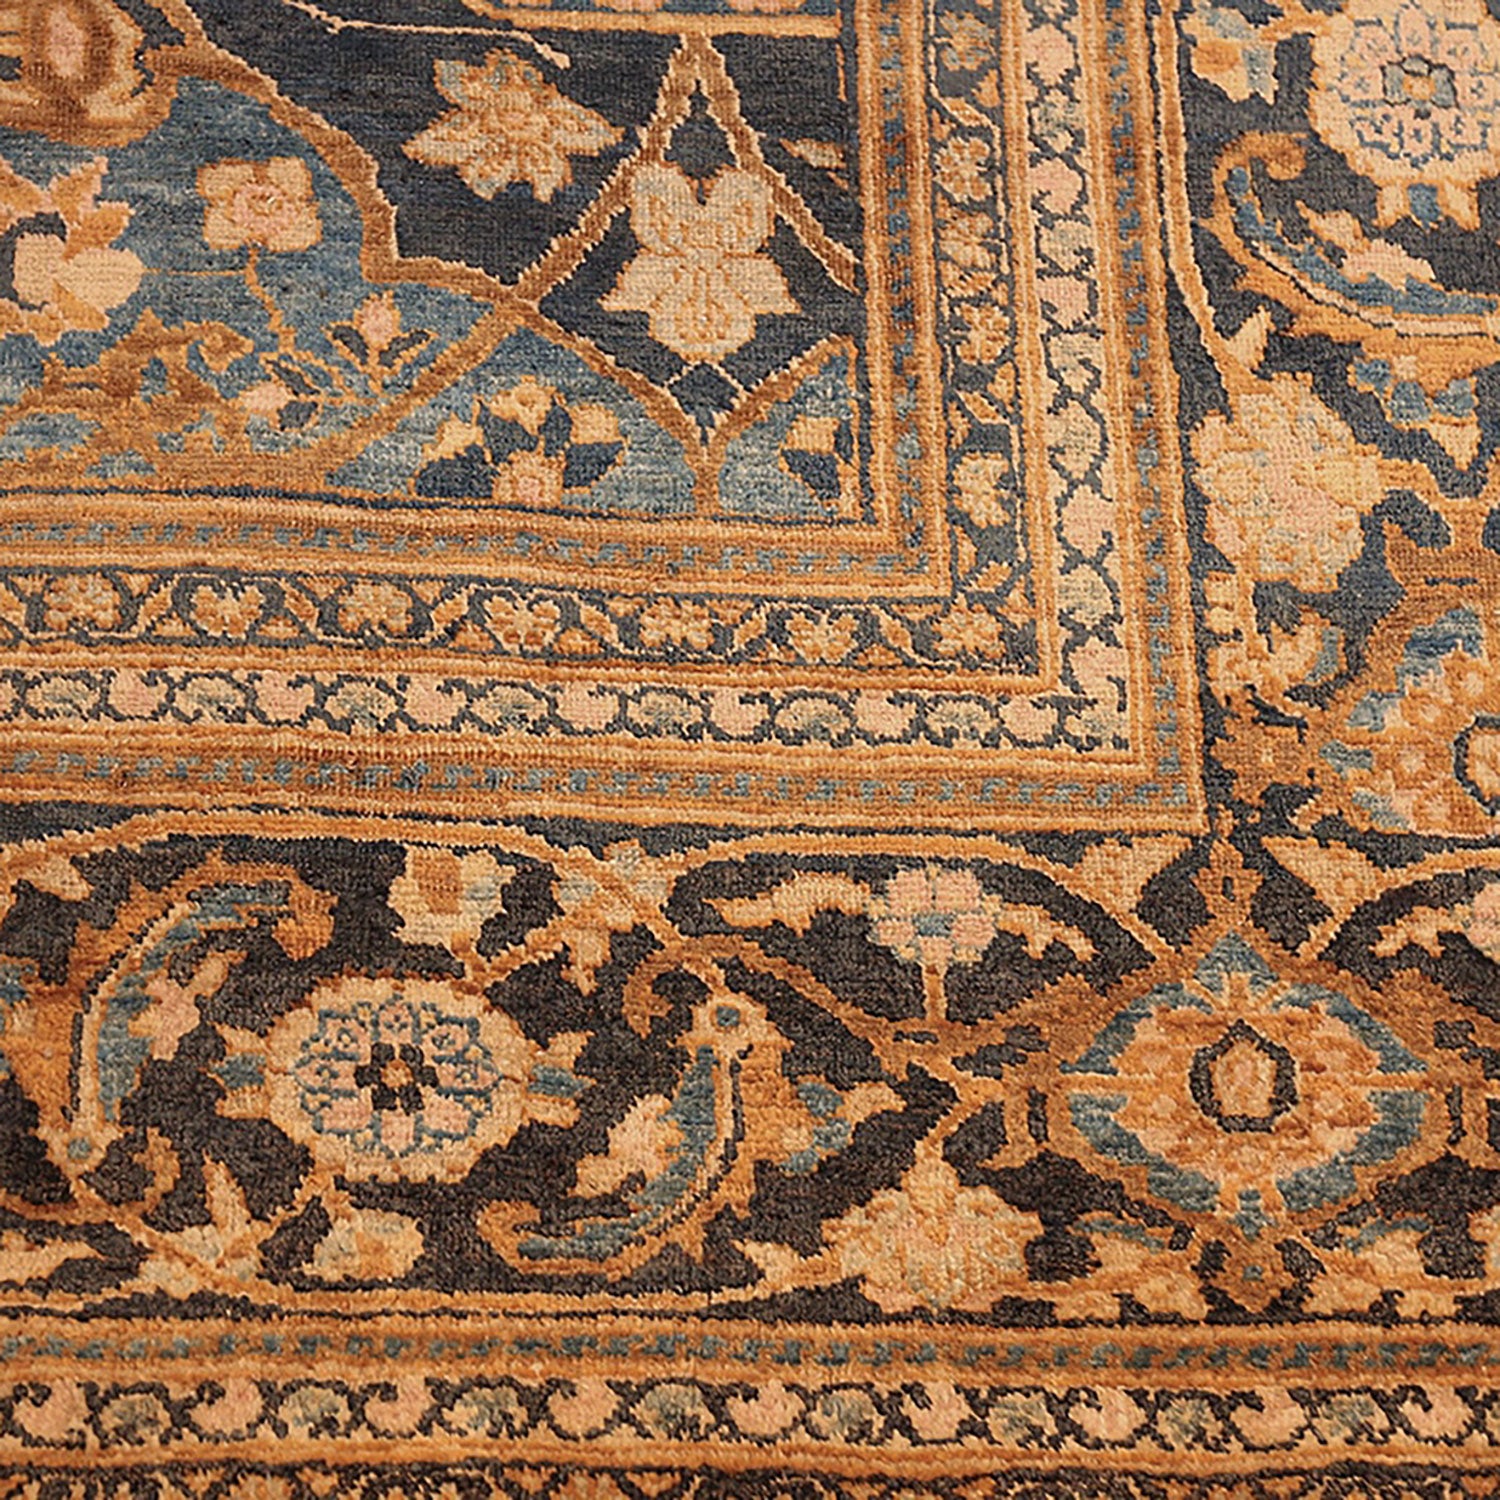 Intricate, ornate carpet showcases rich colors and traditional craftsmanship